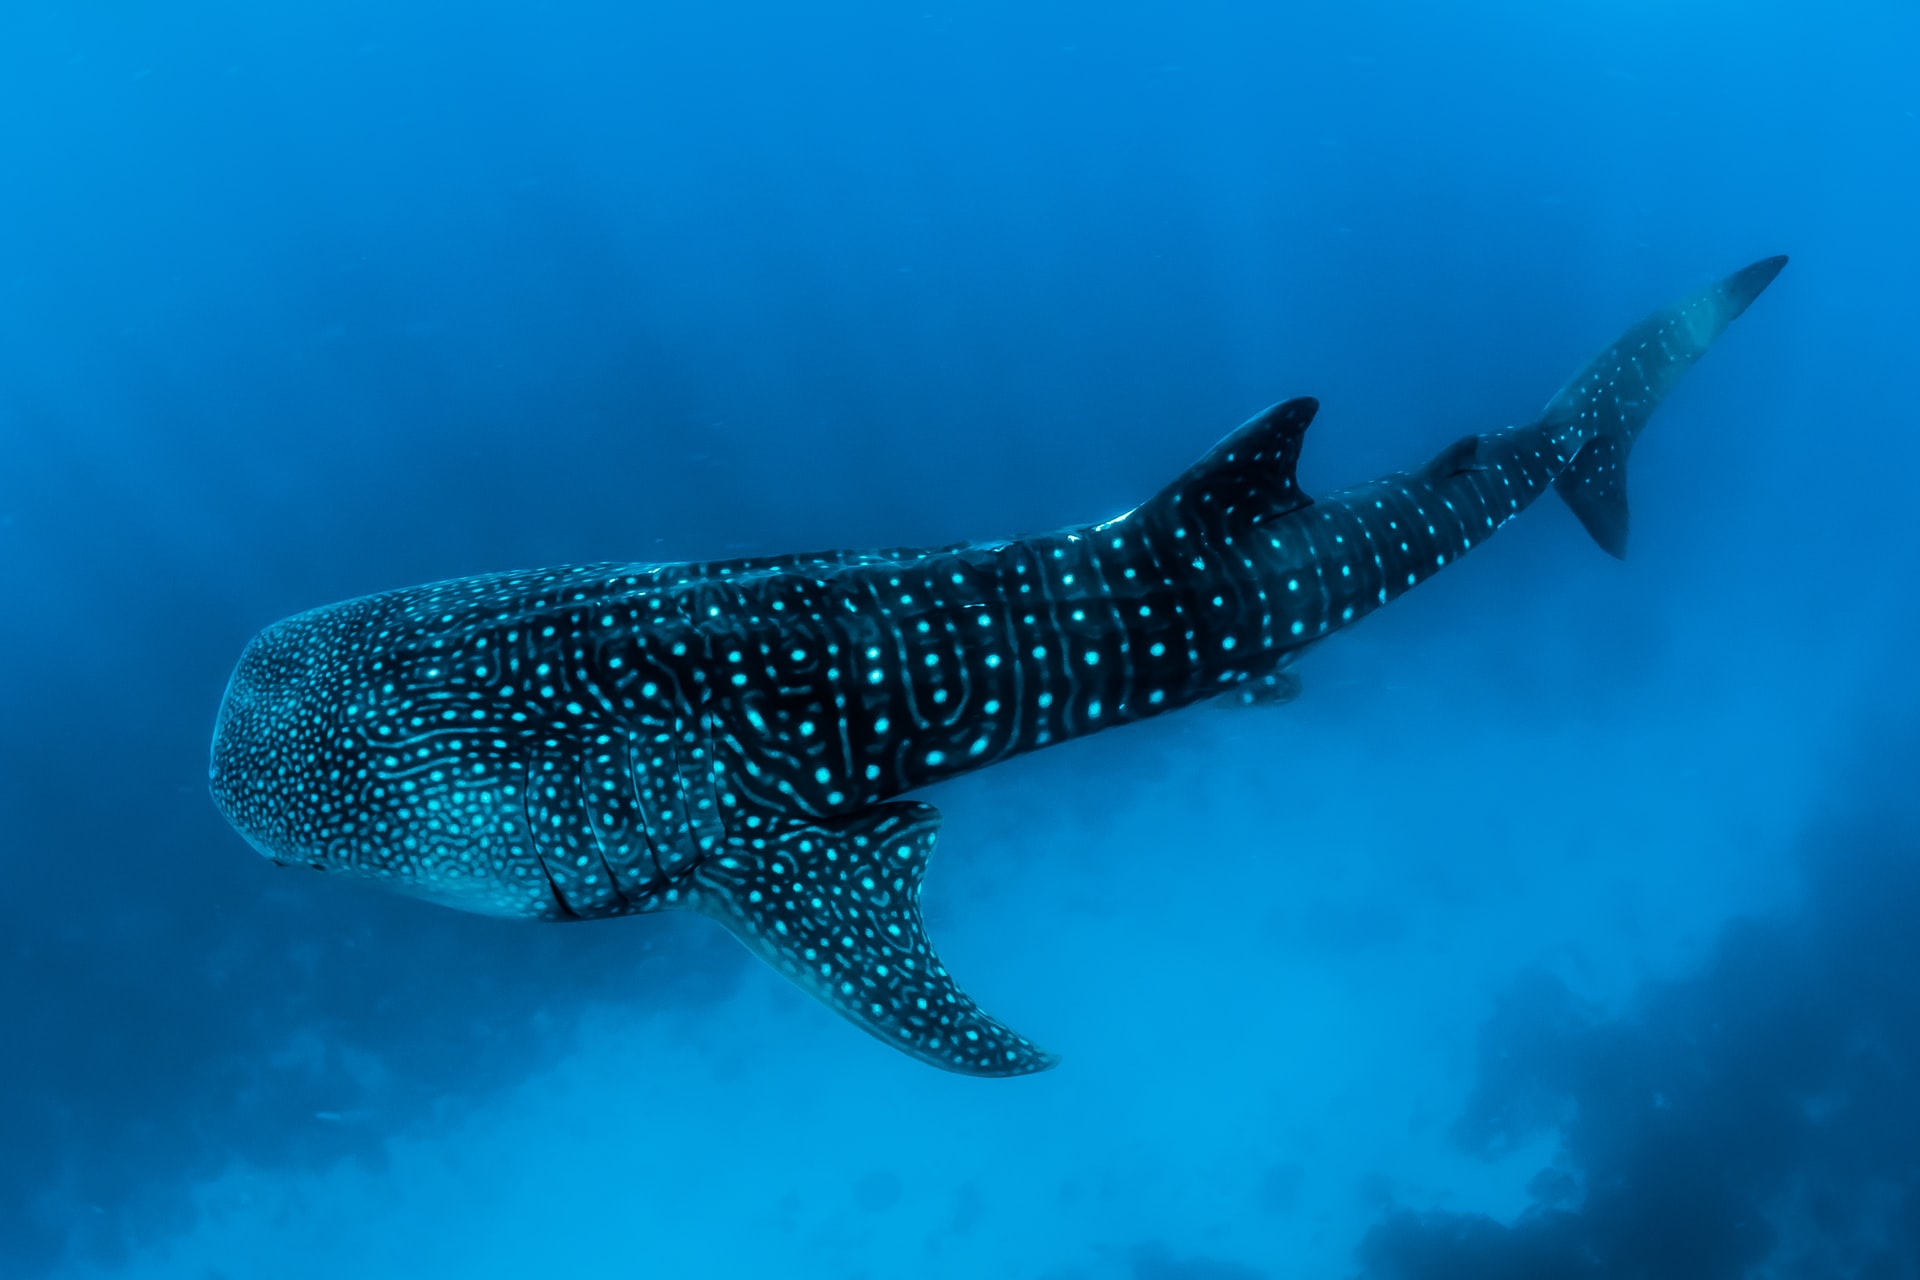 Although its mouth can stretch to four feet wide, a whale shark’s teeth are so tiny that they can only eat small shrimp, fish and plankton by using their gill rakers as a suction filter. They feed by gulping mouthfuls of water and forcing that water through their gills. Prey gets trapped in dermal denticles and a rake-like structure called the pharynx. This amazing creature can filter over 6,000 litres/1,500 gallons of water an hour through their gills.